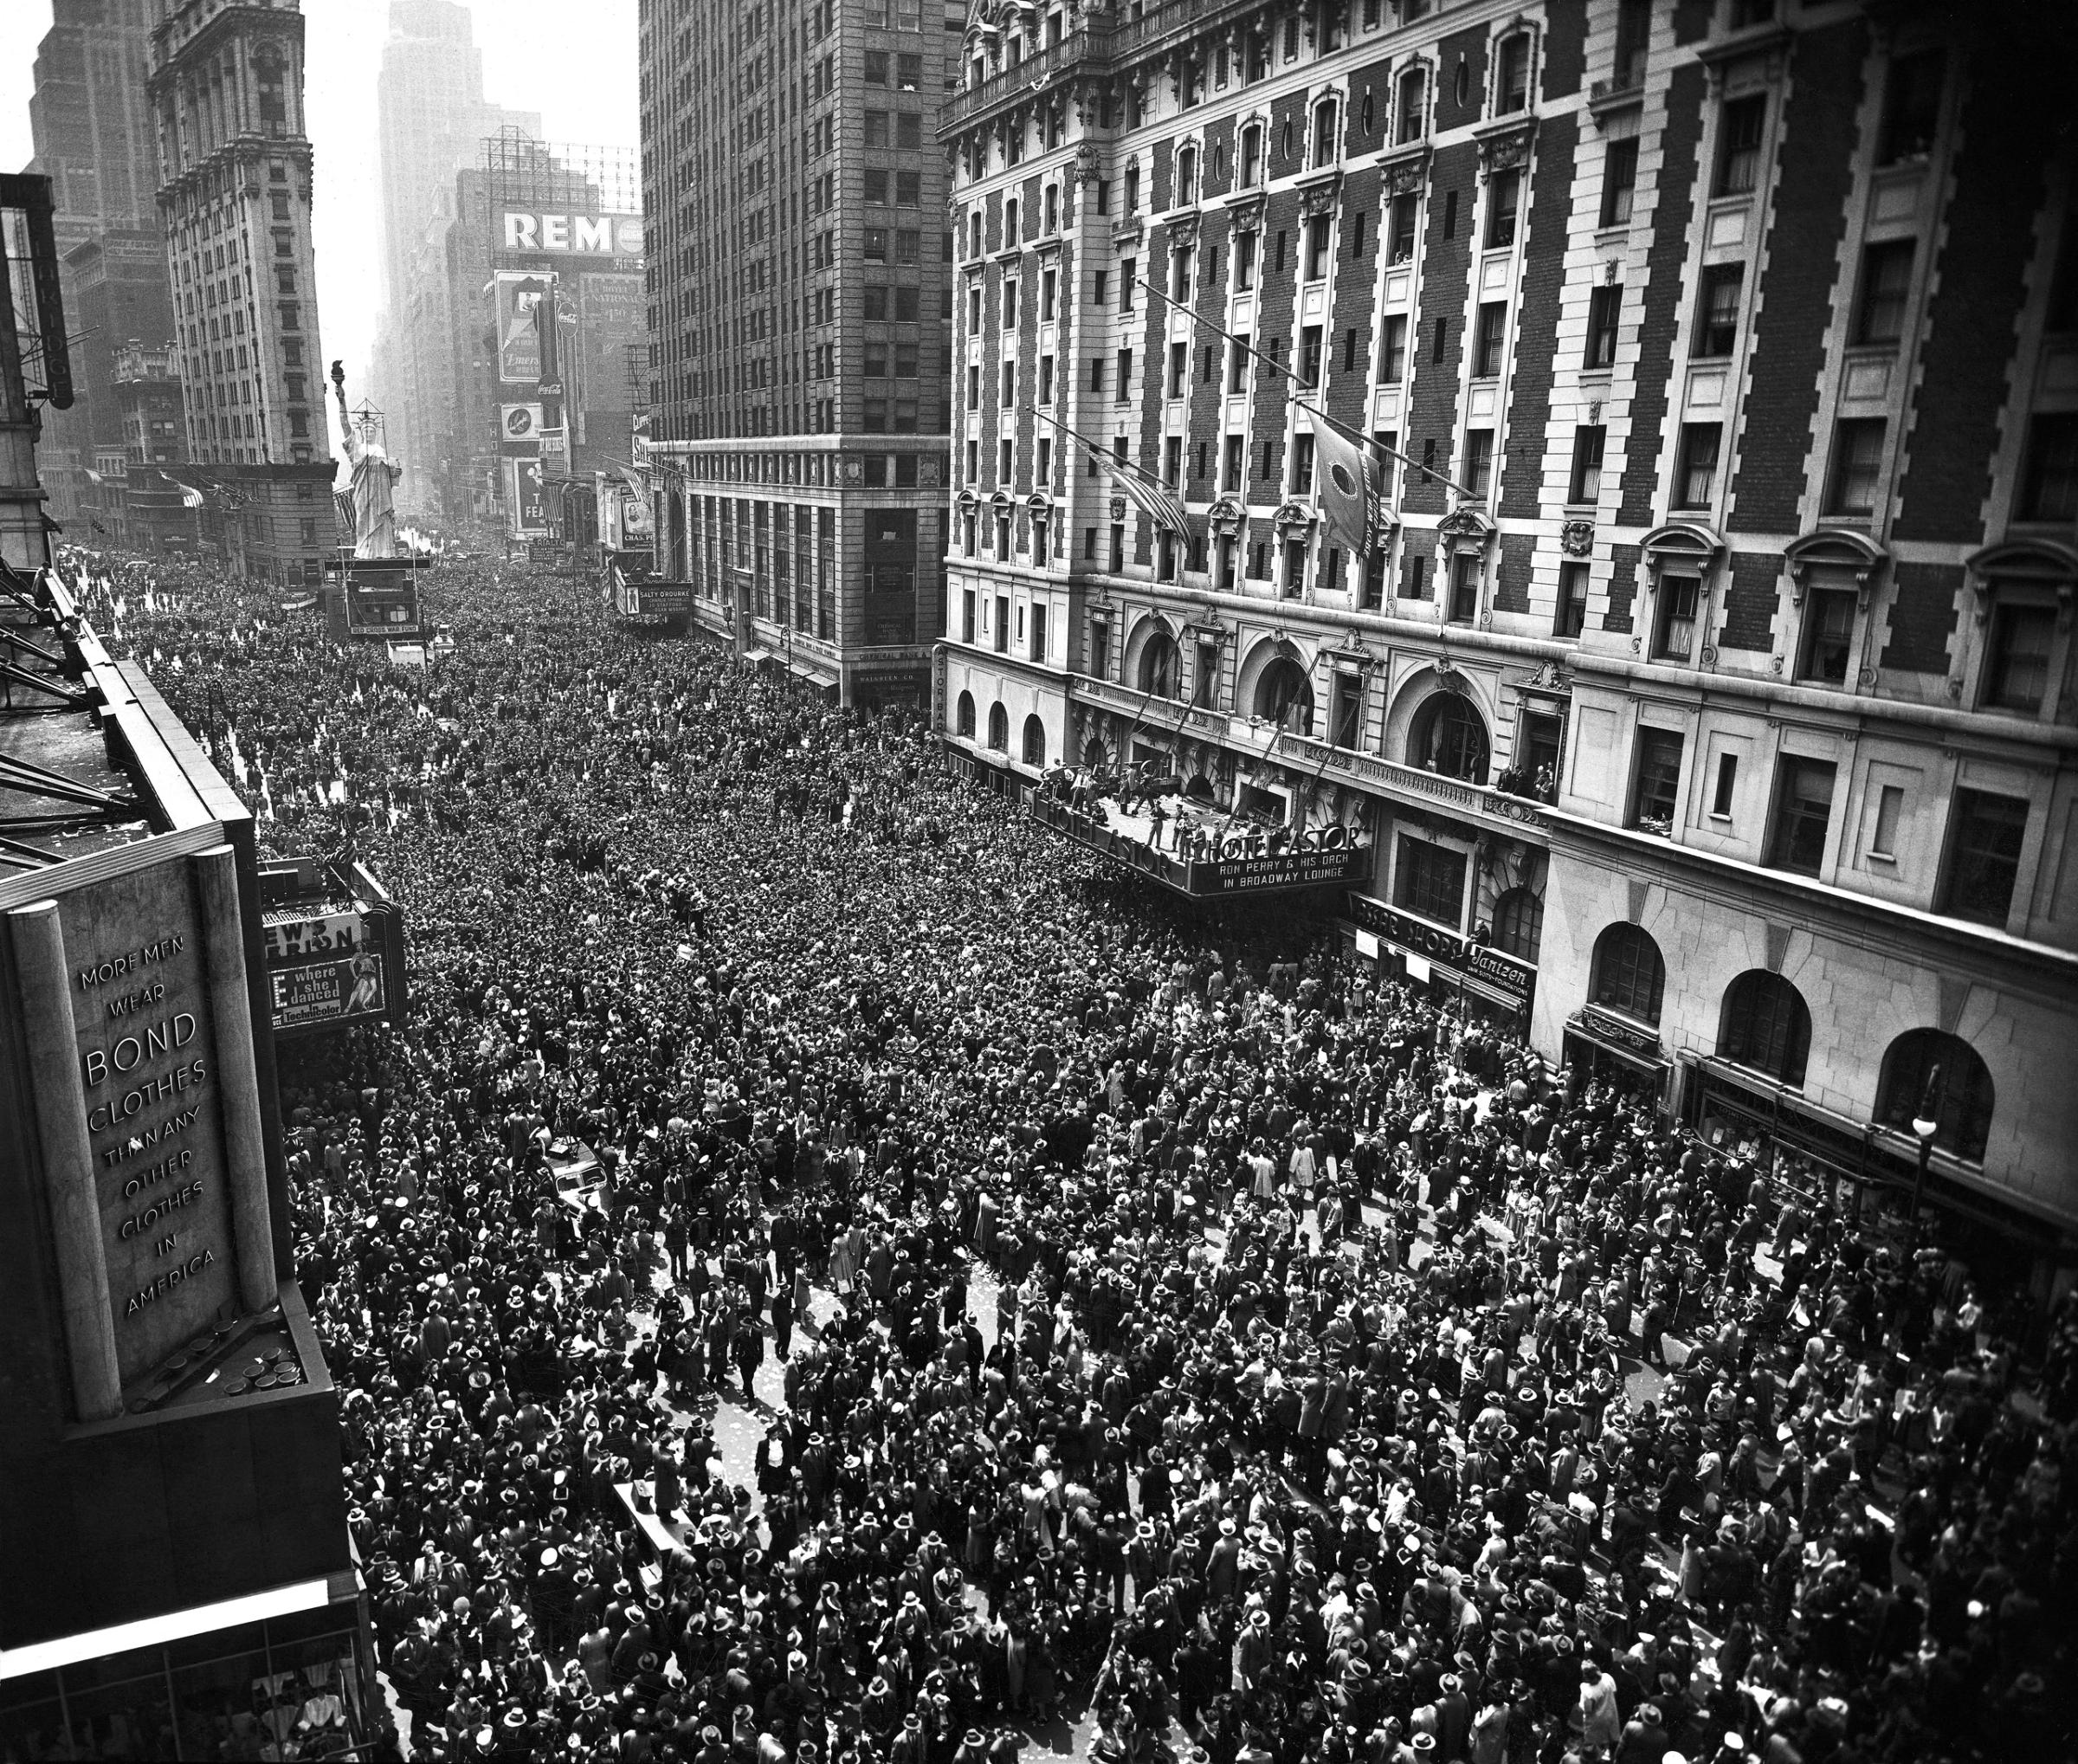 Some 500,000 celebrants swarm into Times Square the morning of May 7 after the A.P. announcement that Germany had surrendered. Over a public-address system Mayor Laguardia told all to go home or return to their jobs.